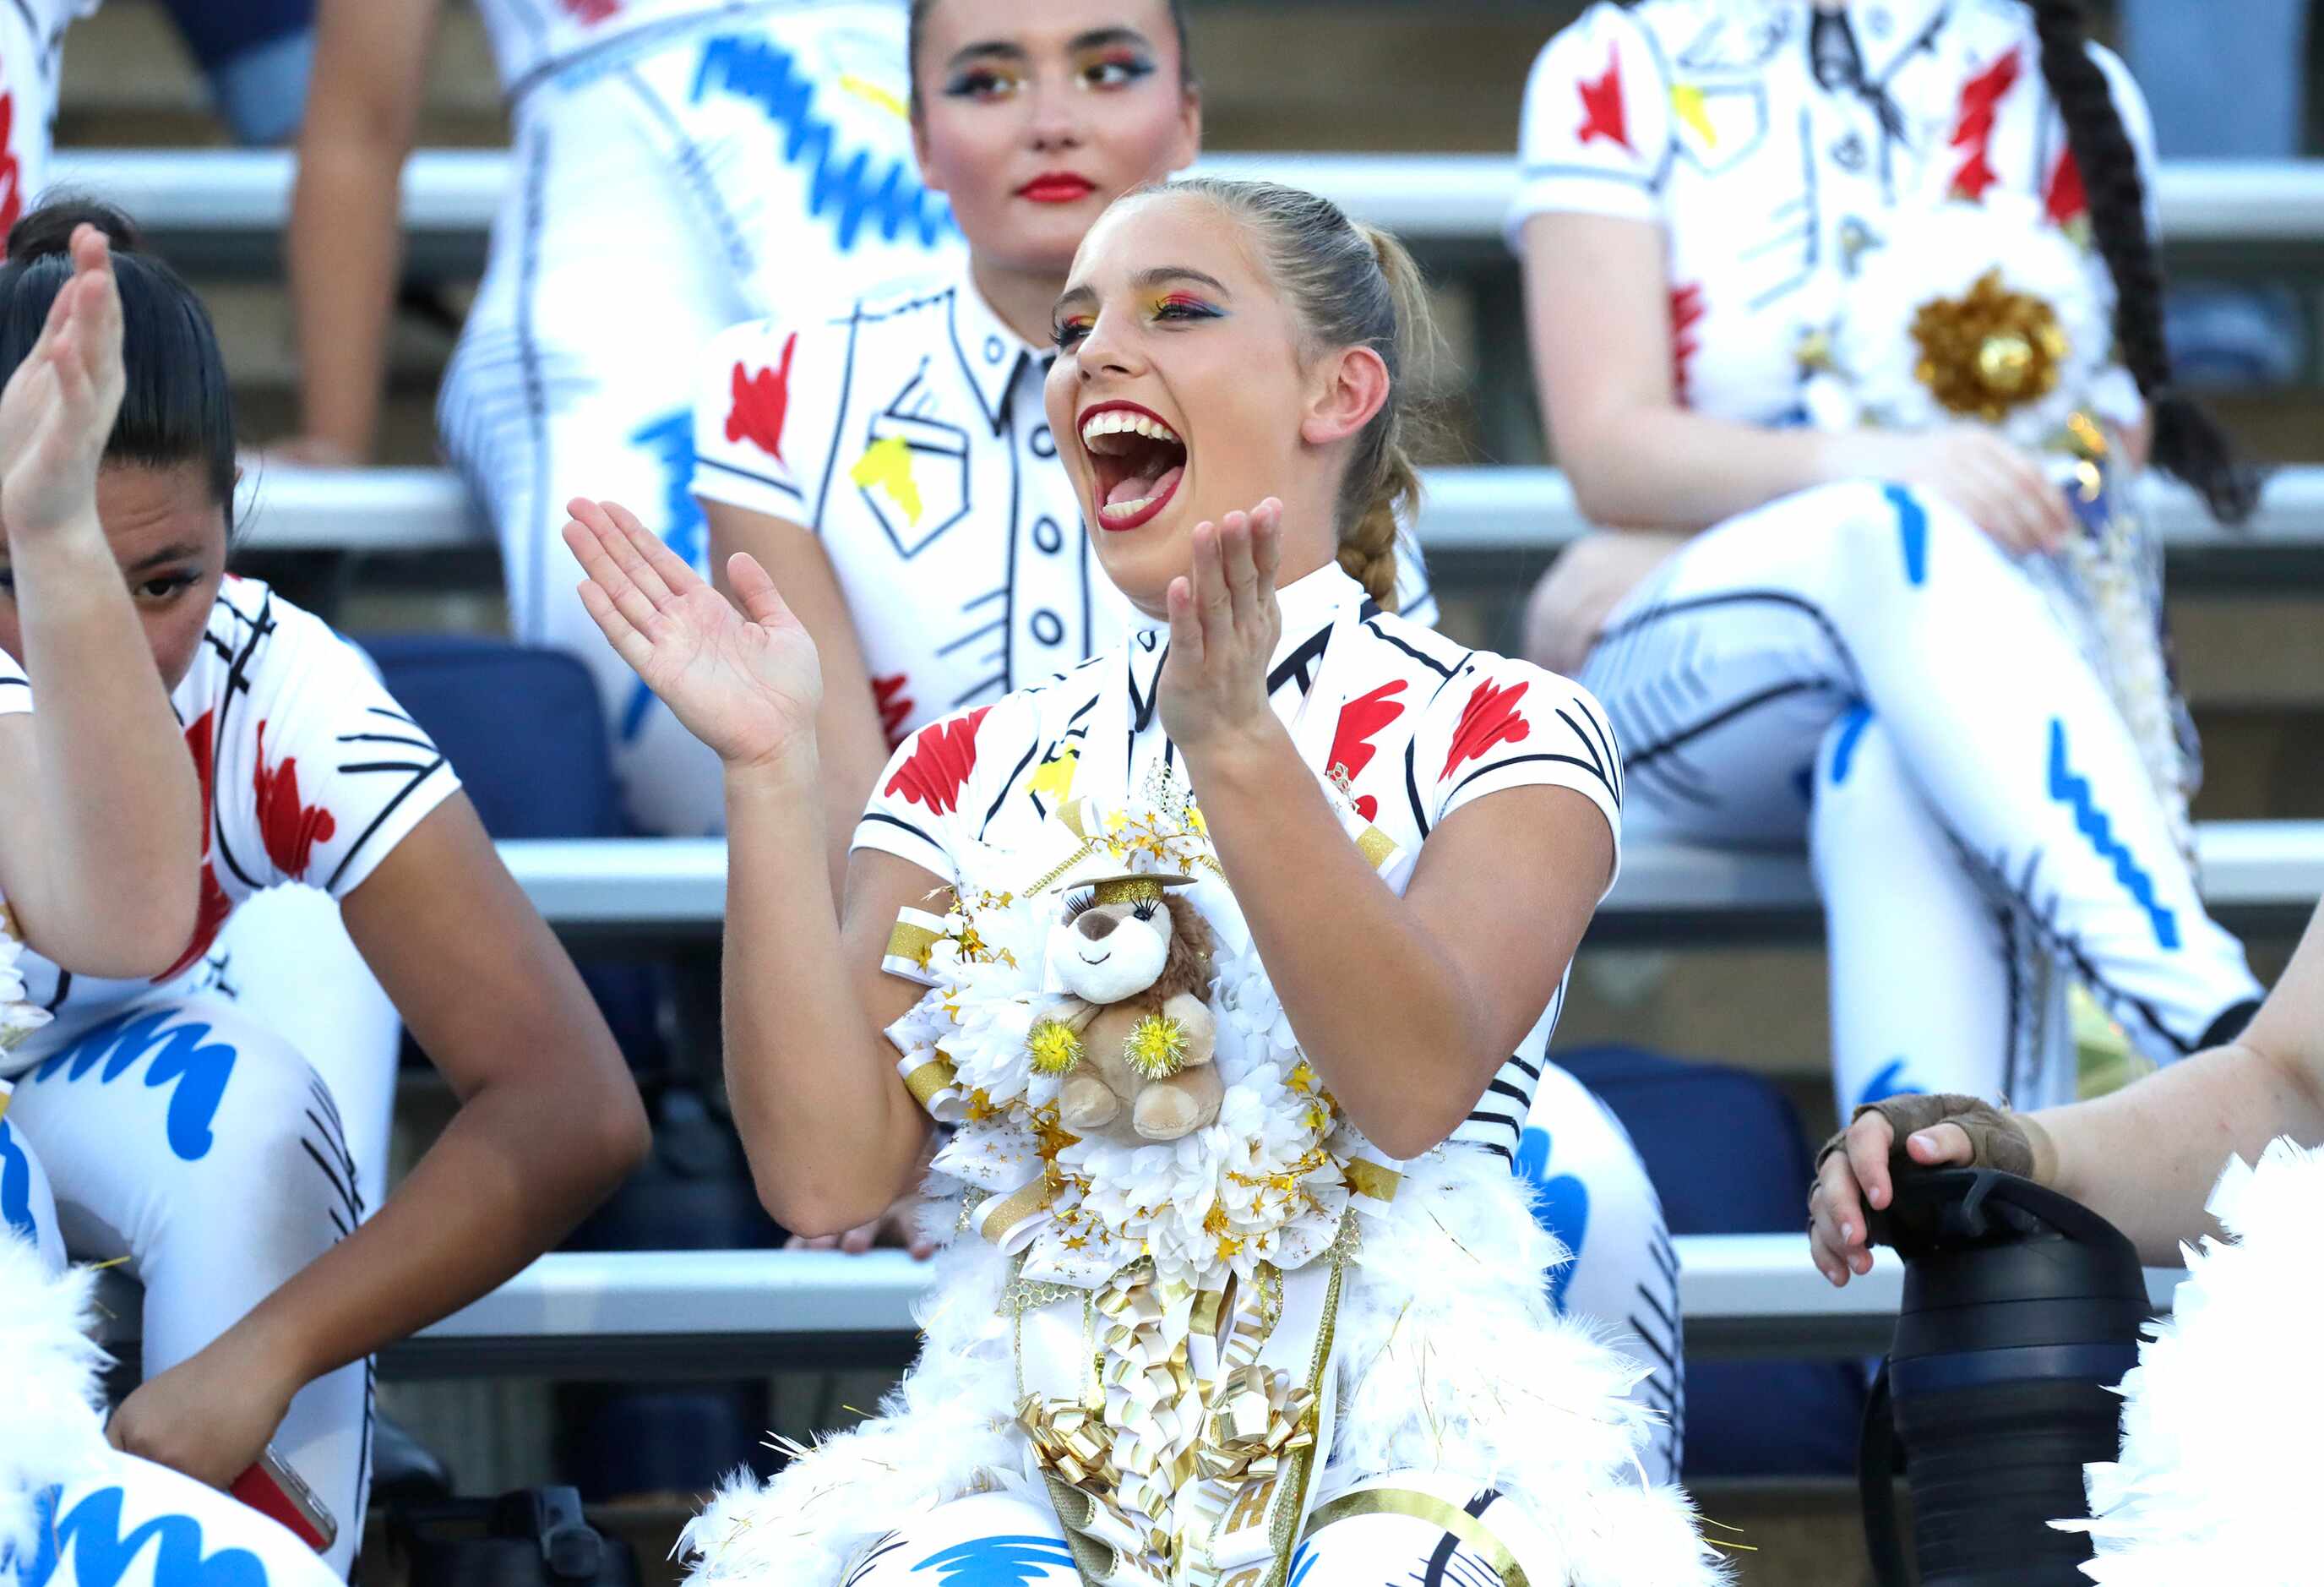 Emily Snidely, 17, with the McKinney High School Color Guard, cheers as McKinney High School...